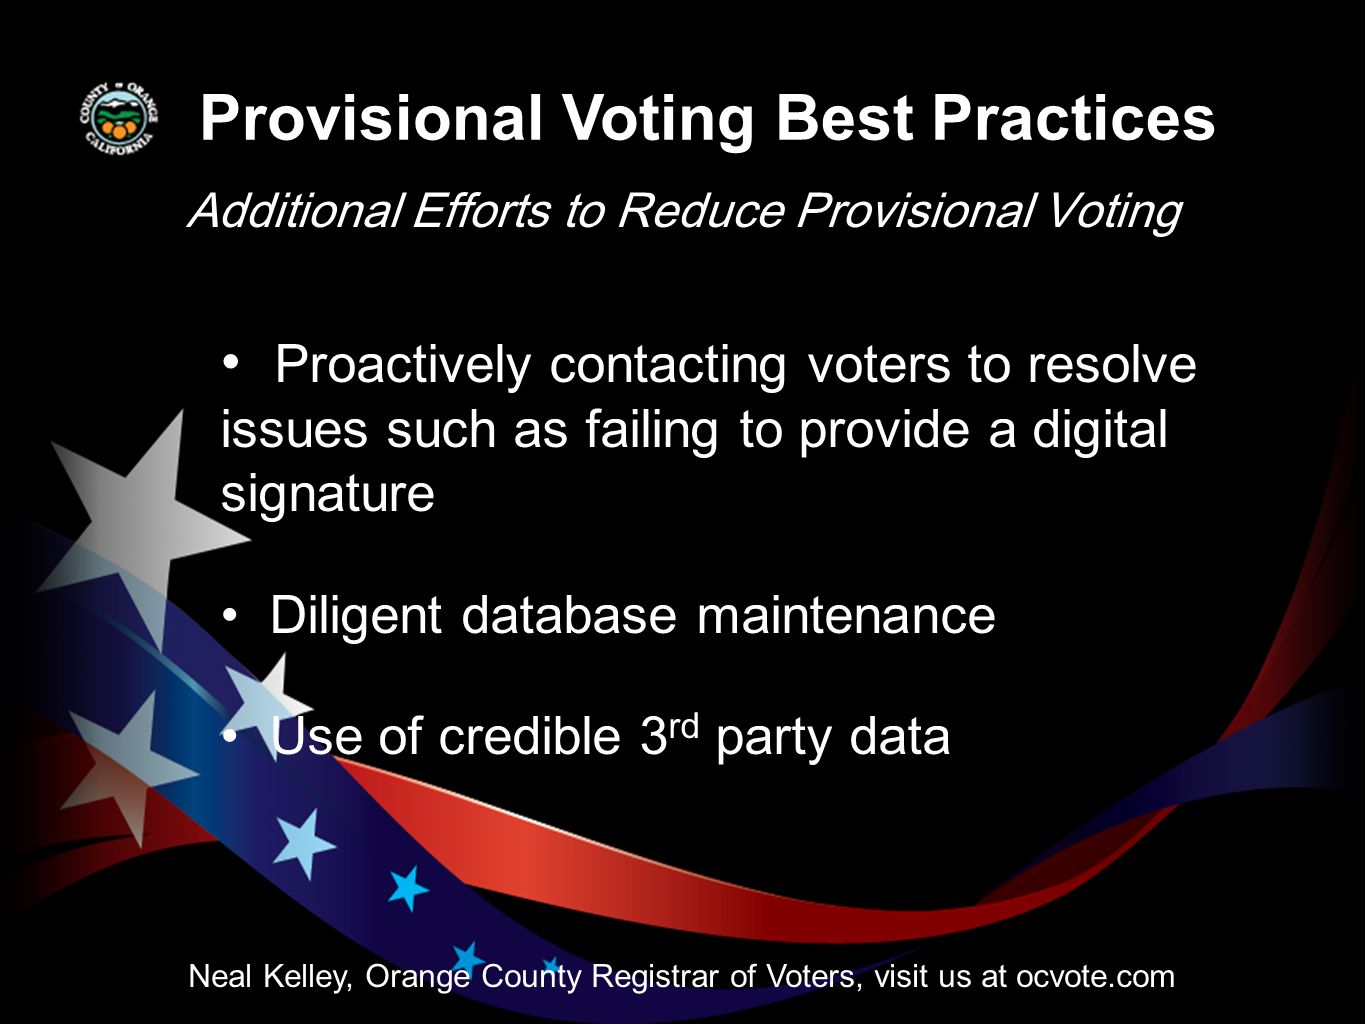 Provisional Voting Best Practices Additional Efforts to Reduce Provisional Voting Neal Kelley, Orange County Registrar of Voters, visit us at ocvote.com Proactively contacting voters to resolve issues such as failing to provide a digital signature Diligent database maintenance Use of credible 3 rd party data